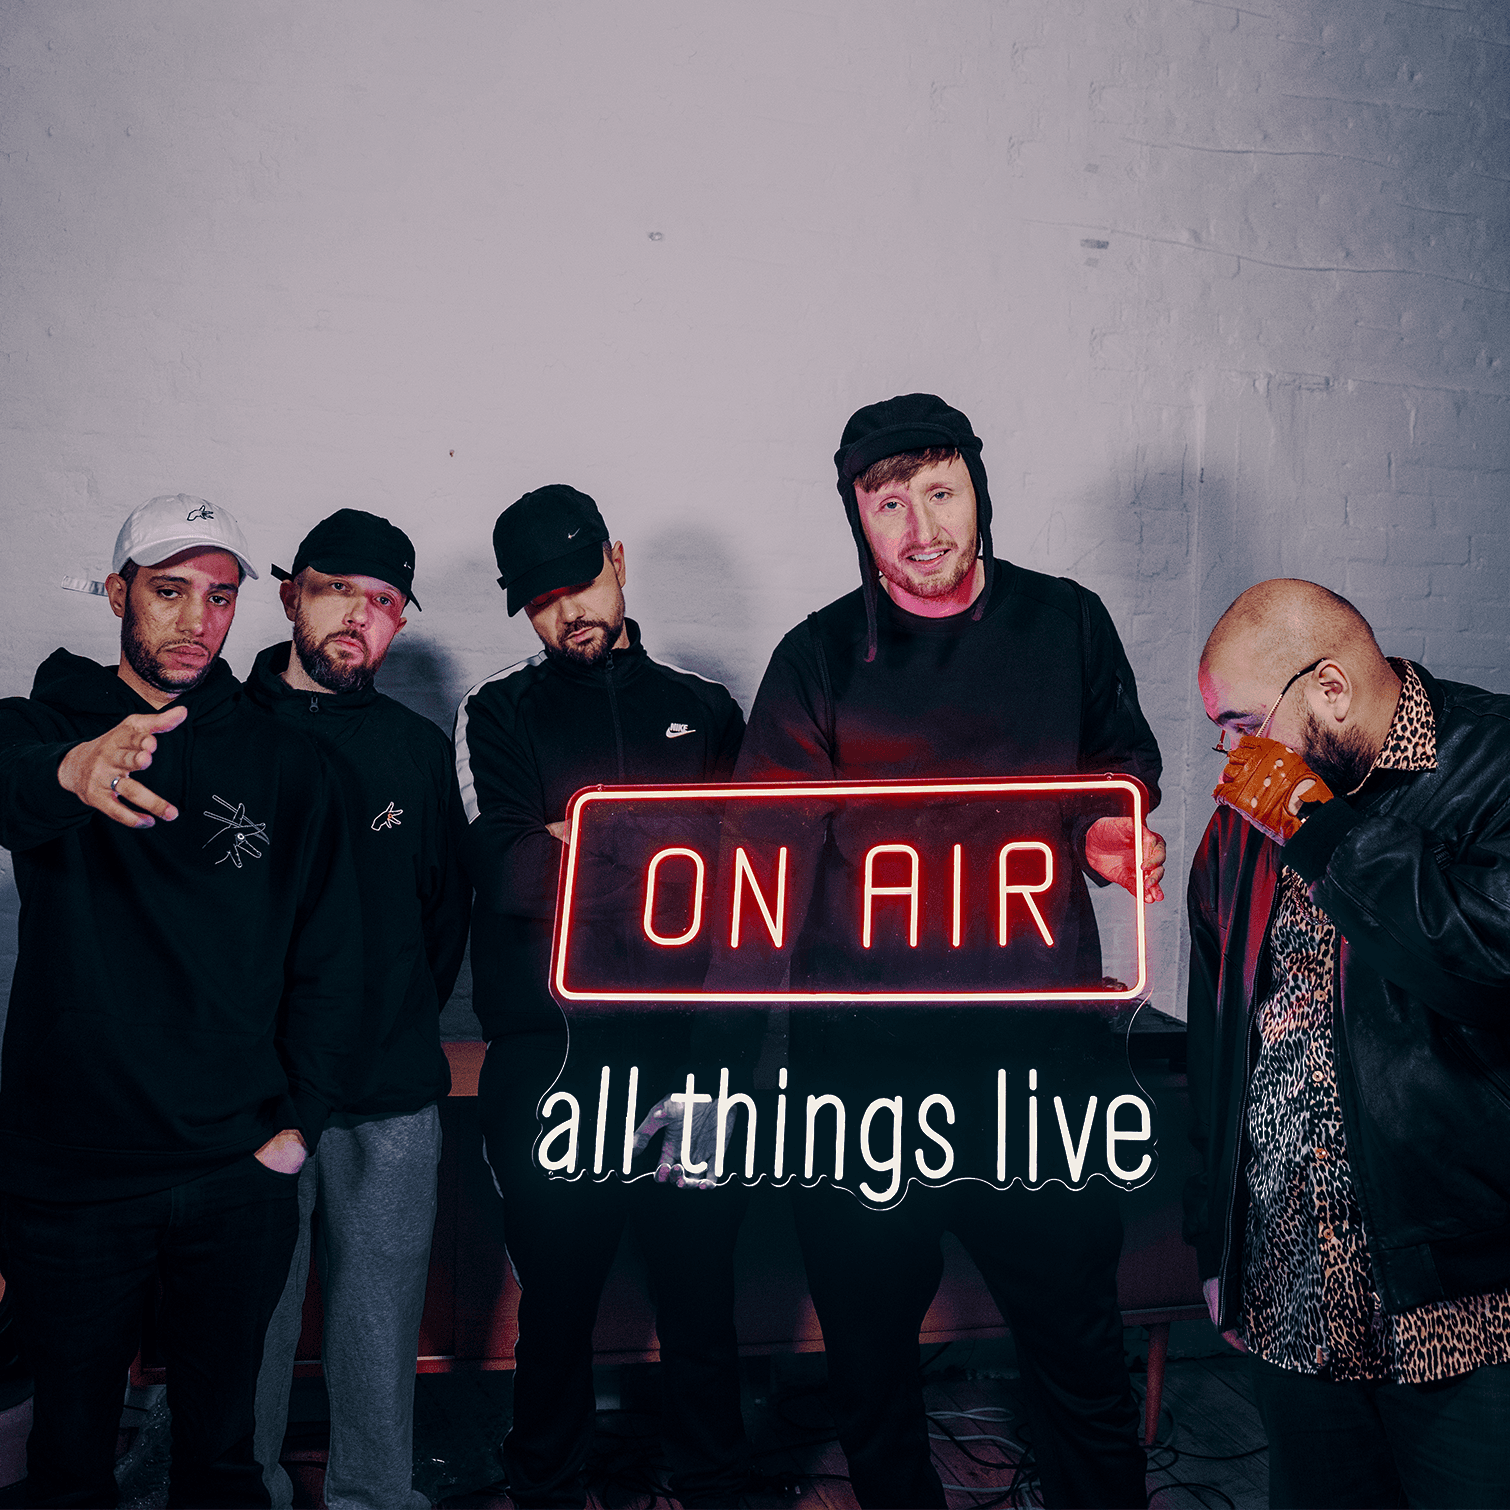 Kurupt FM stand in front of an On Air neon sign ahead of the live concert stream from Printworks London